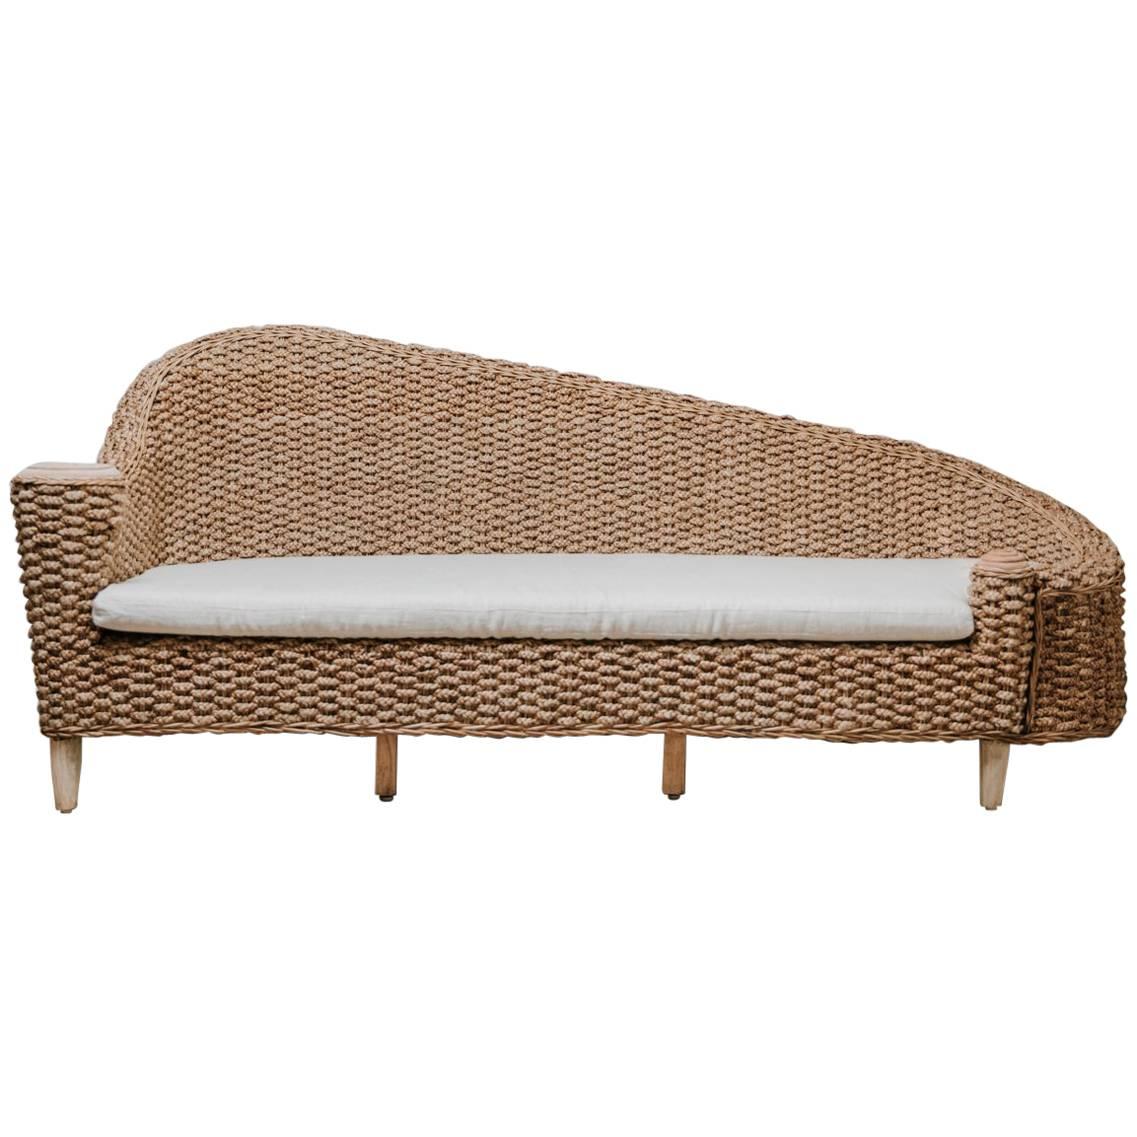 Contemporary Rope and Wood Chaise Longue